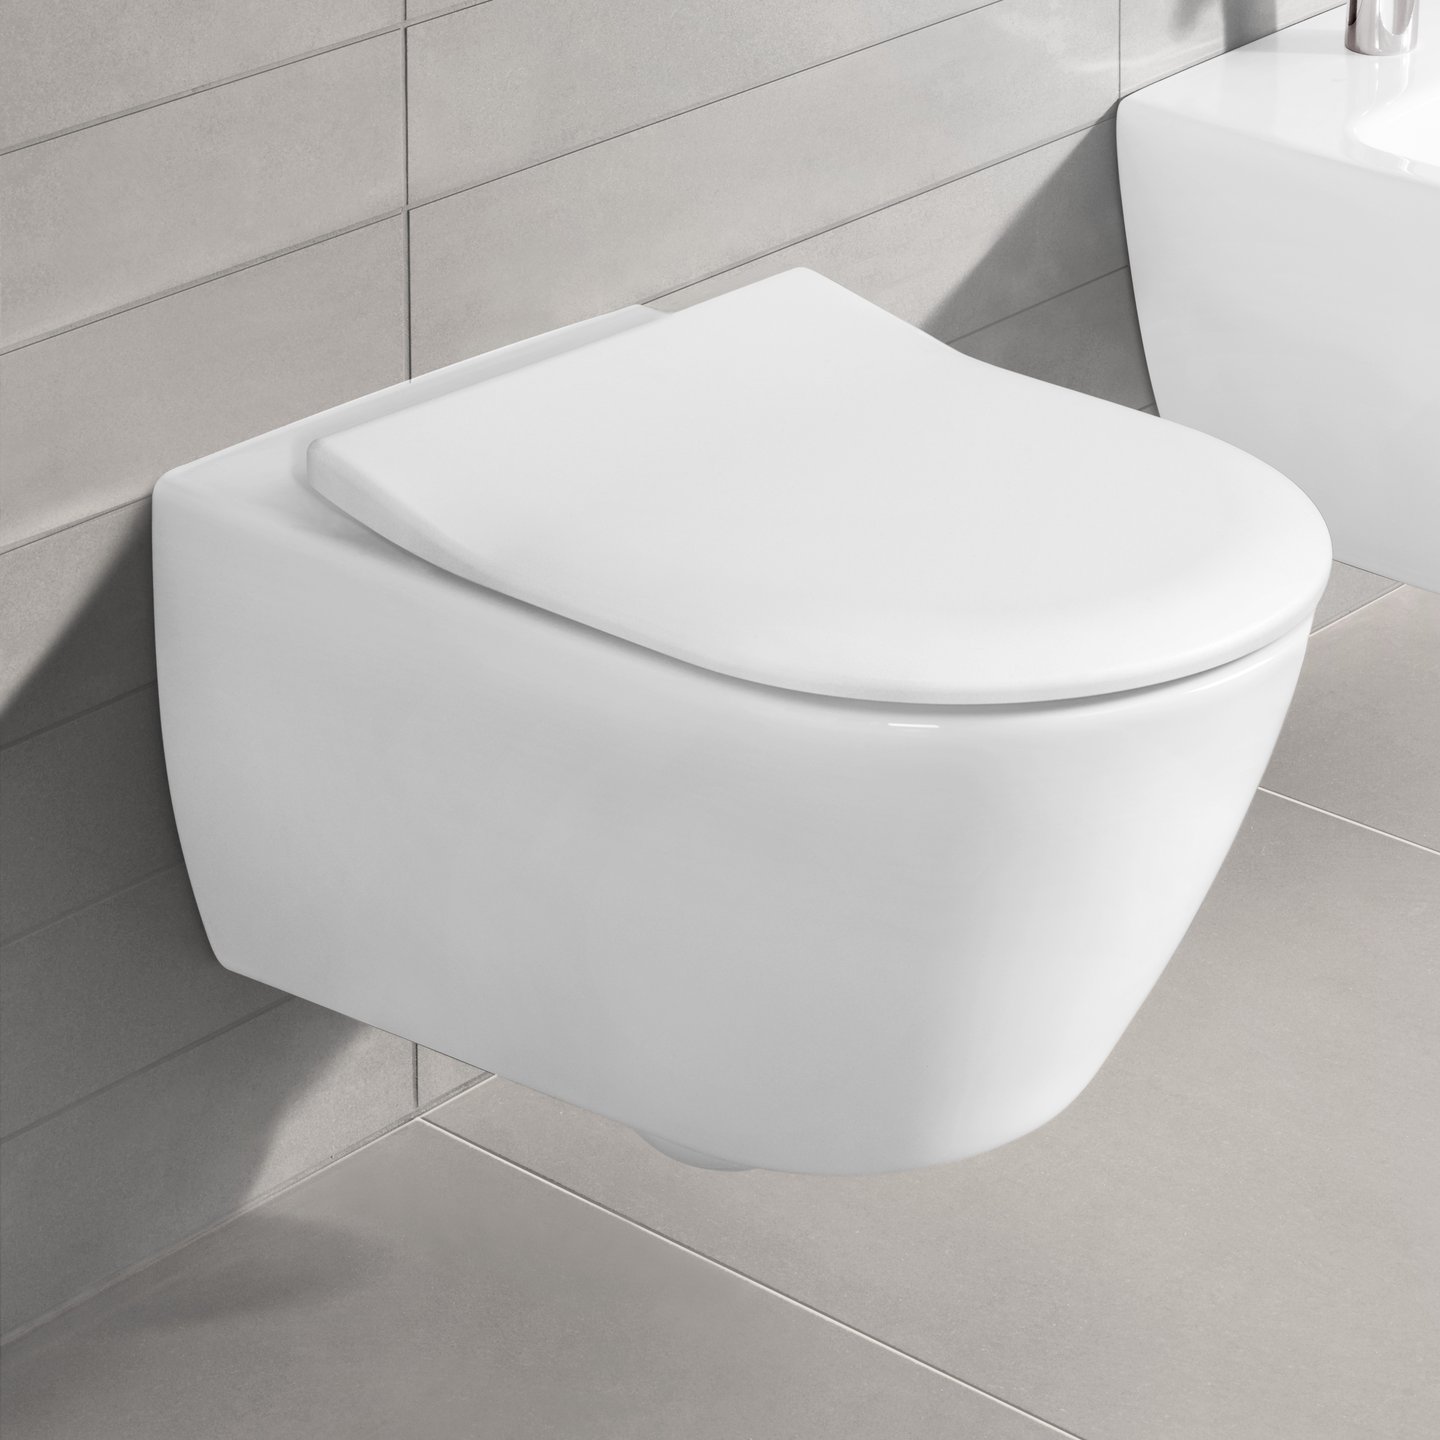 Villeroy & Boch 2.0 combi pack wall-mounted washdown toilet, open flush rim, with seat white - 5614R201 | REUTER